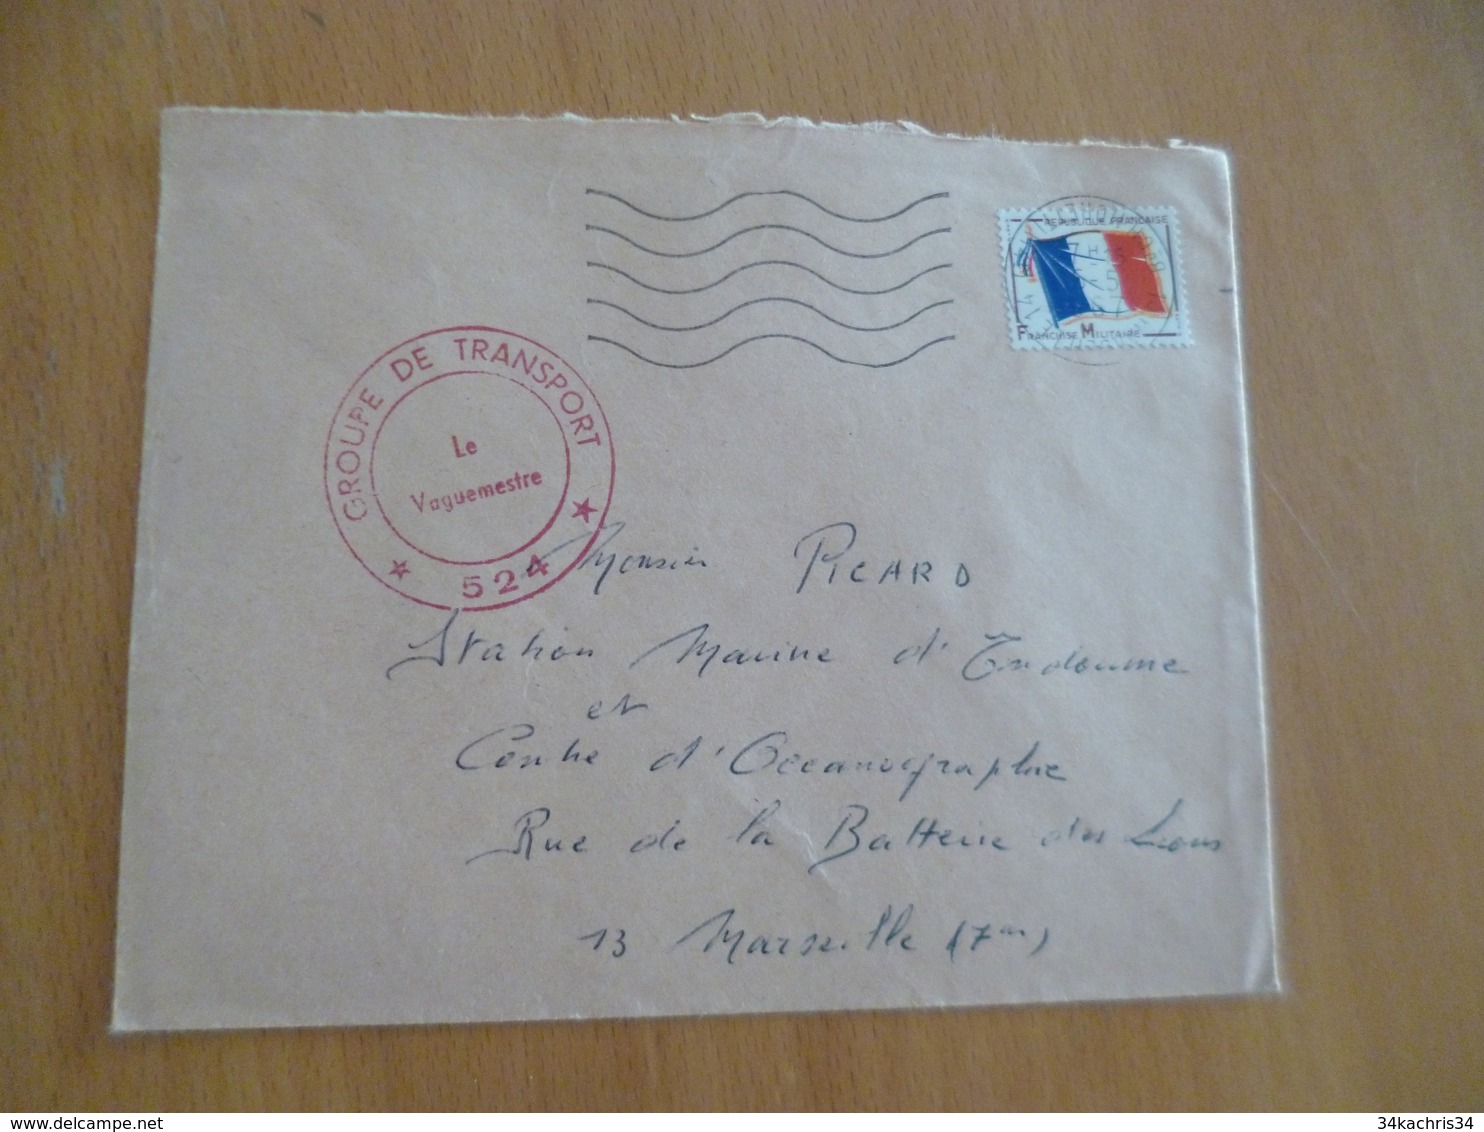 Sur Lettre France TP Guerre Cachet 13 Marseille 14 1967 Cachet Rouge Groupe De Transport 524 - Military Postmarks From 1900 (out Of Wars Periods)